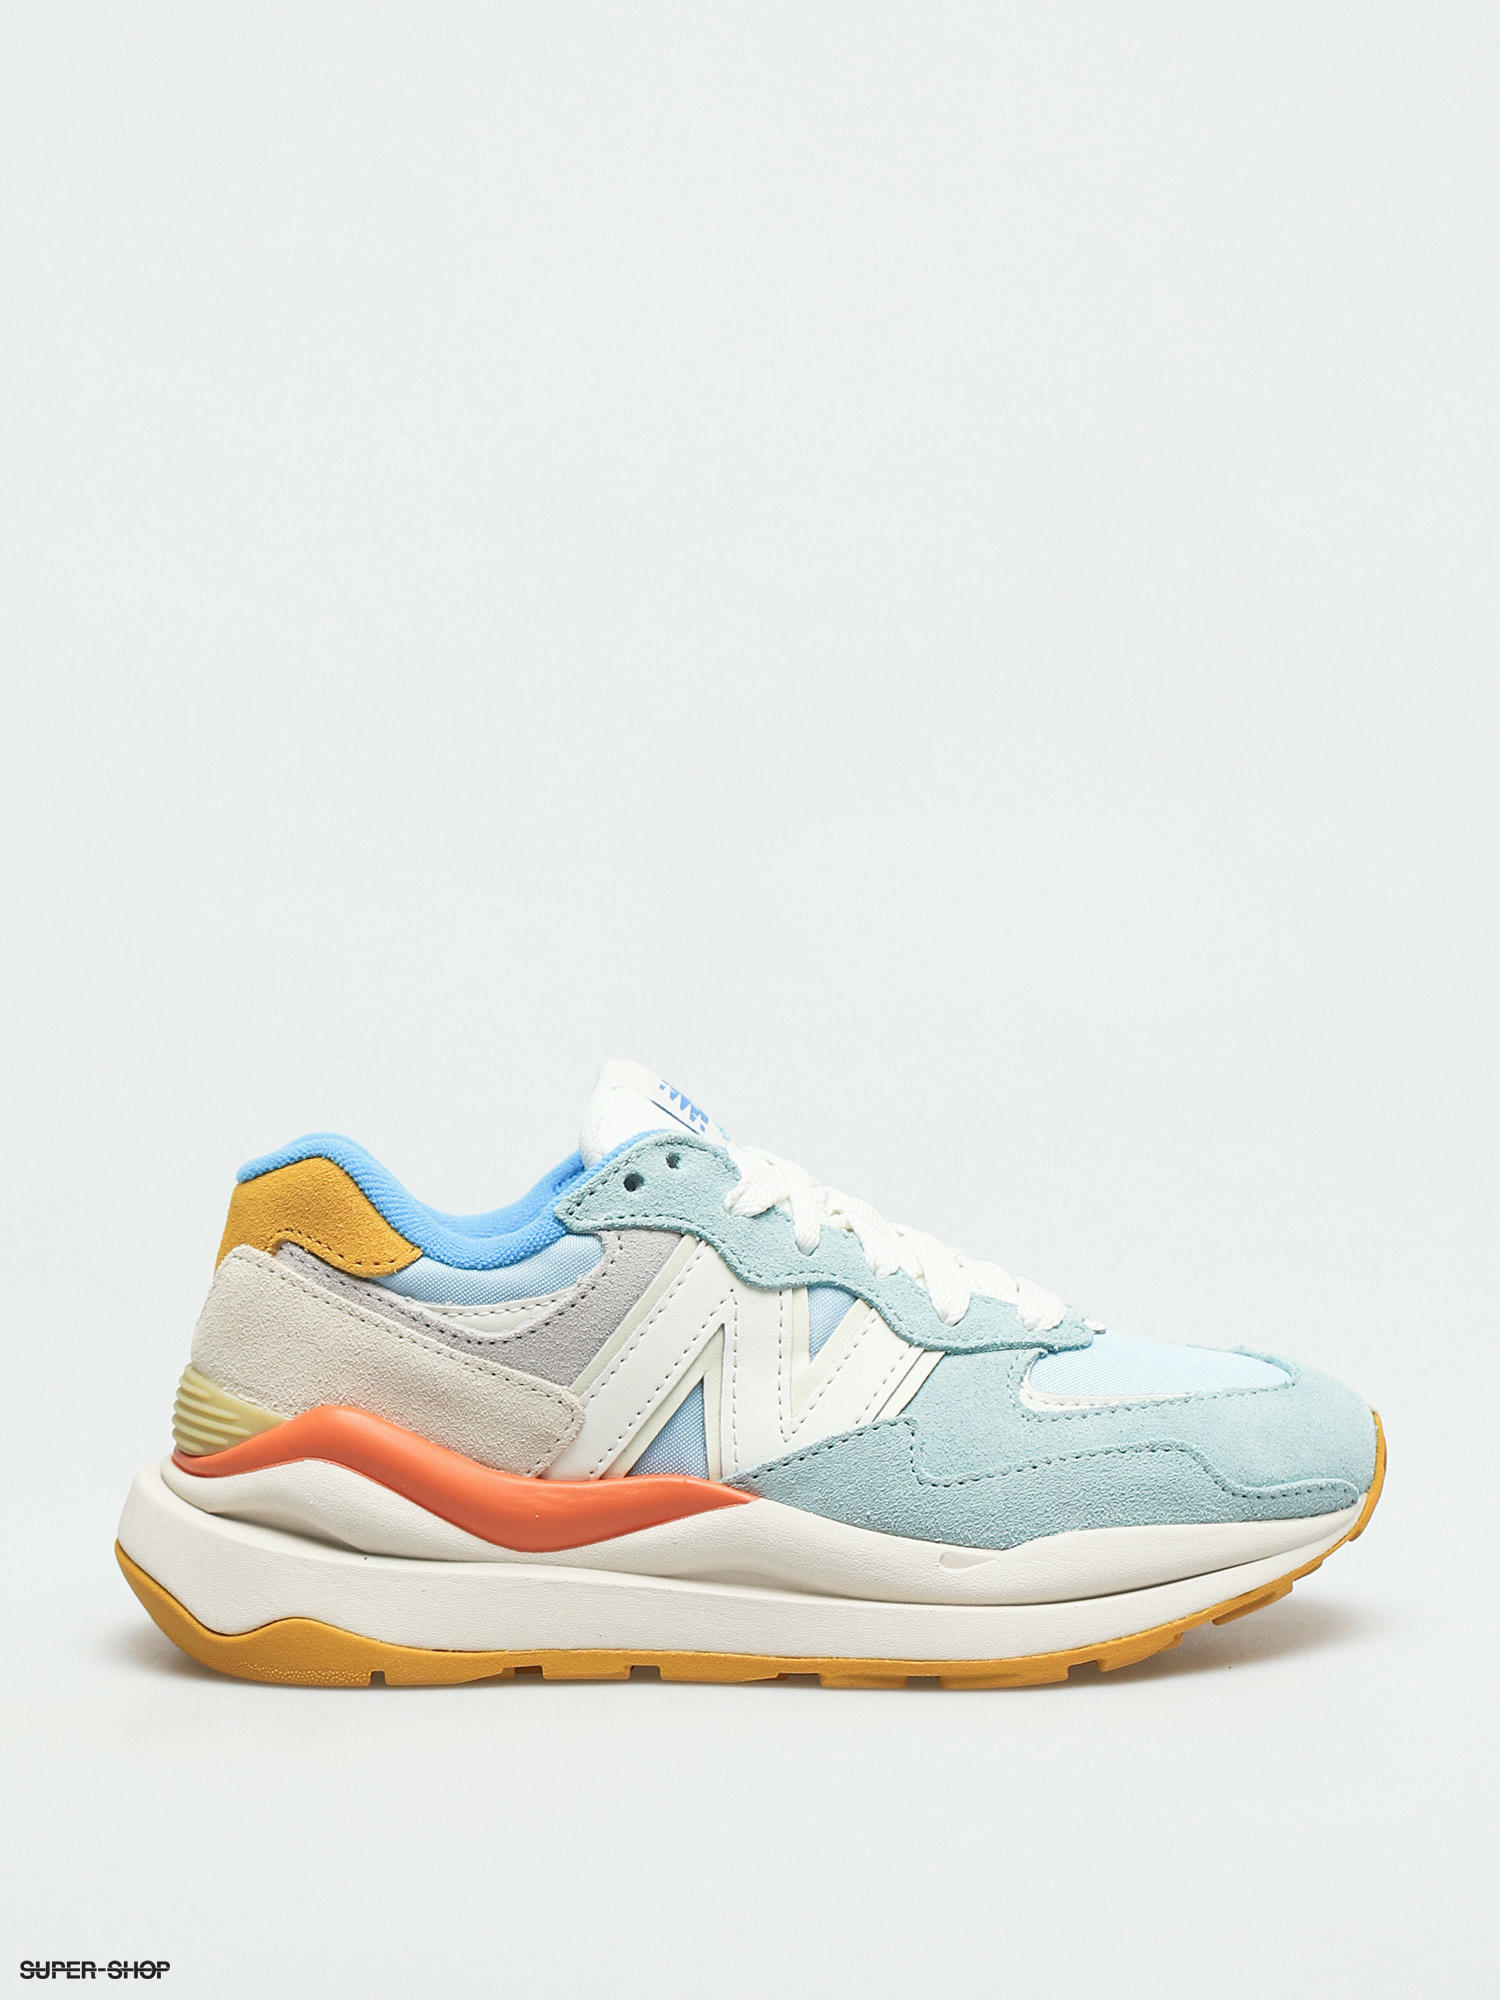 New Balance 5740 Shoes Wmn (oyster pink)